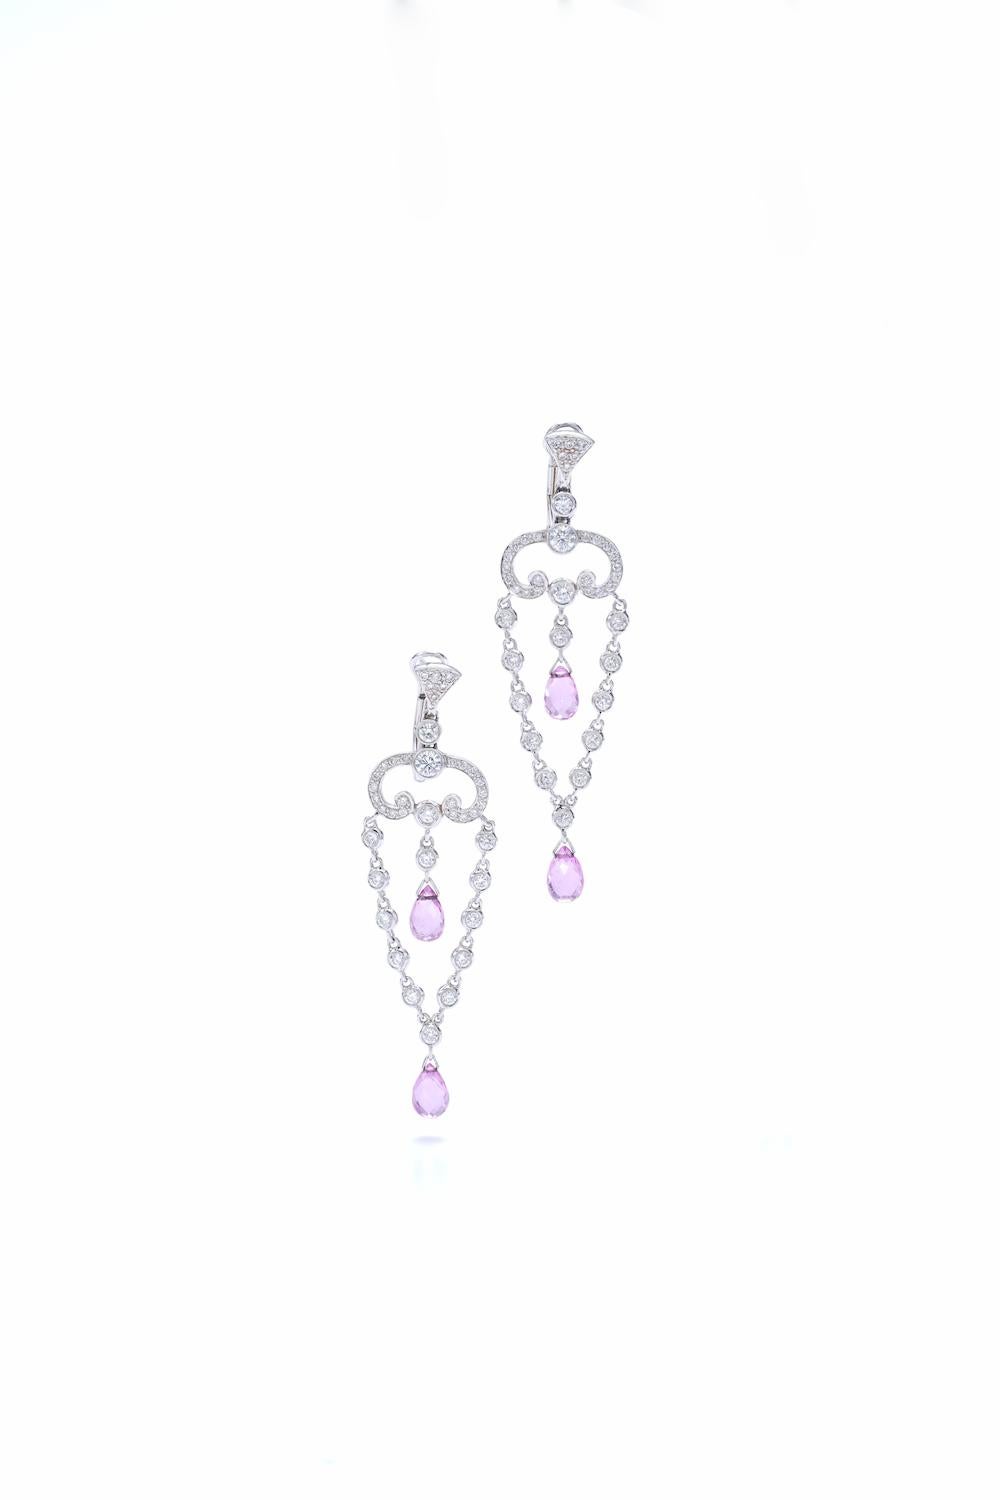 Adler Diamond and Pink Sapphire on White Gold Earrings.
Signed Adler.

Total height: 2.17 inches (5.50 centimeters).
Total weight: 6.67 grams